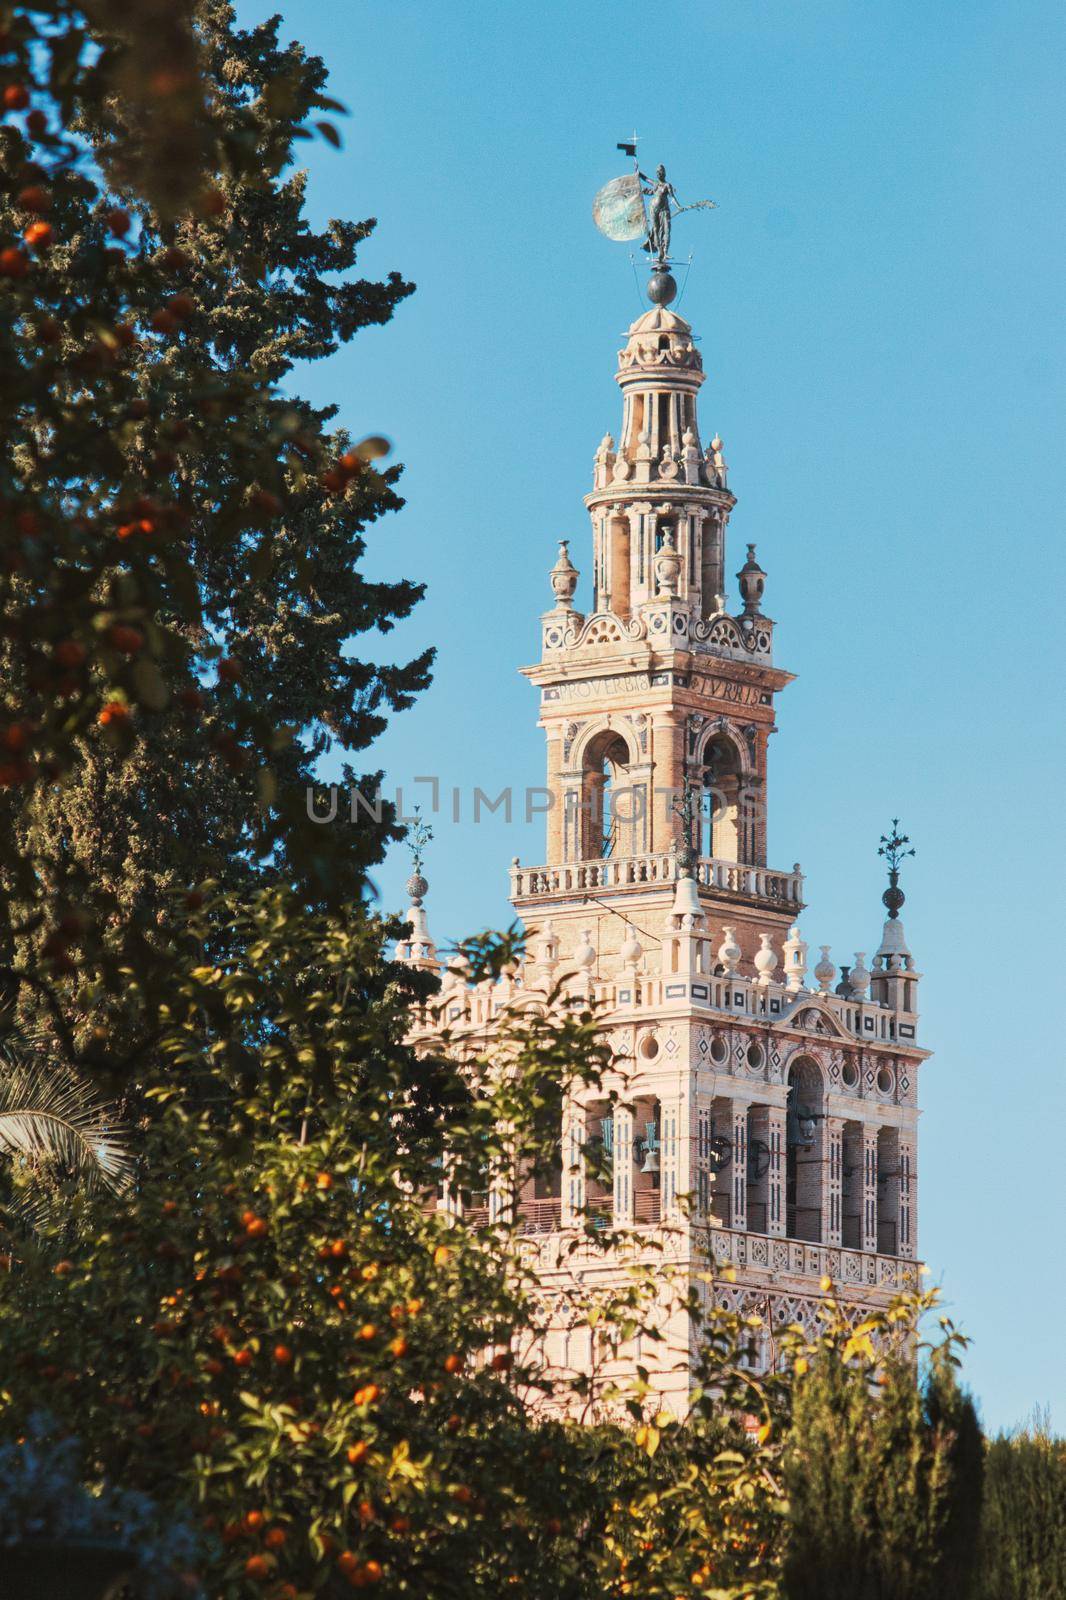 Vertical shot of the Giralda bell tower, part of the cathedral in Seville, Spain - taken from the Real Alcazar royal gardens by tennesseewitney